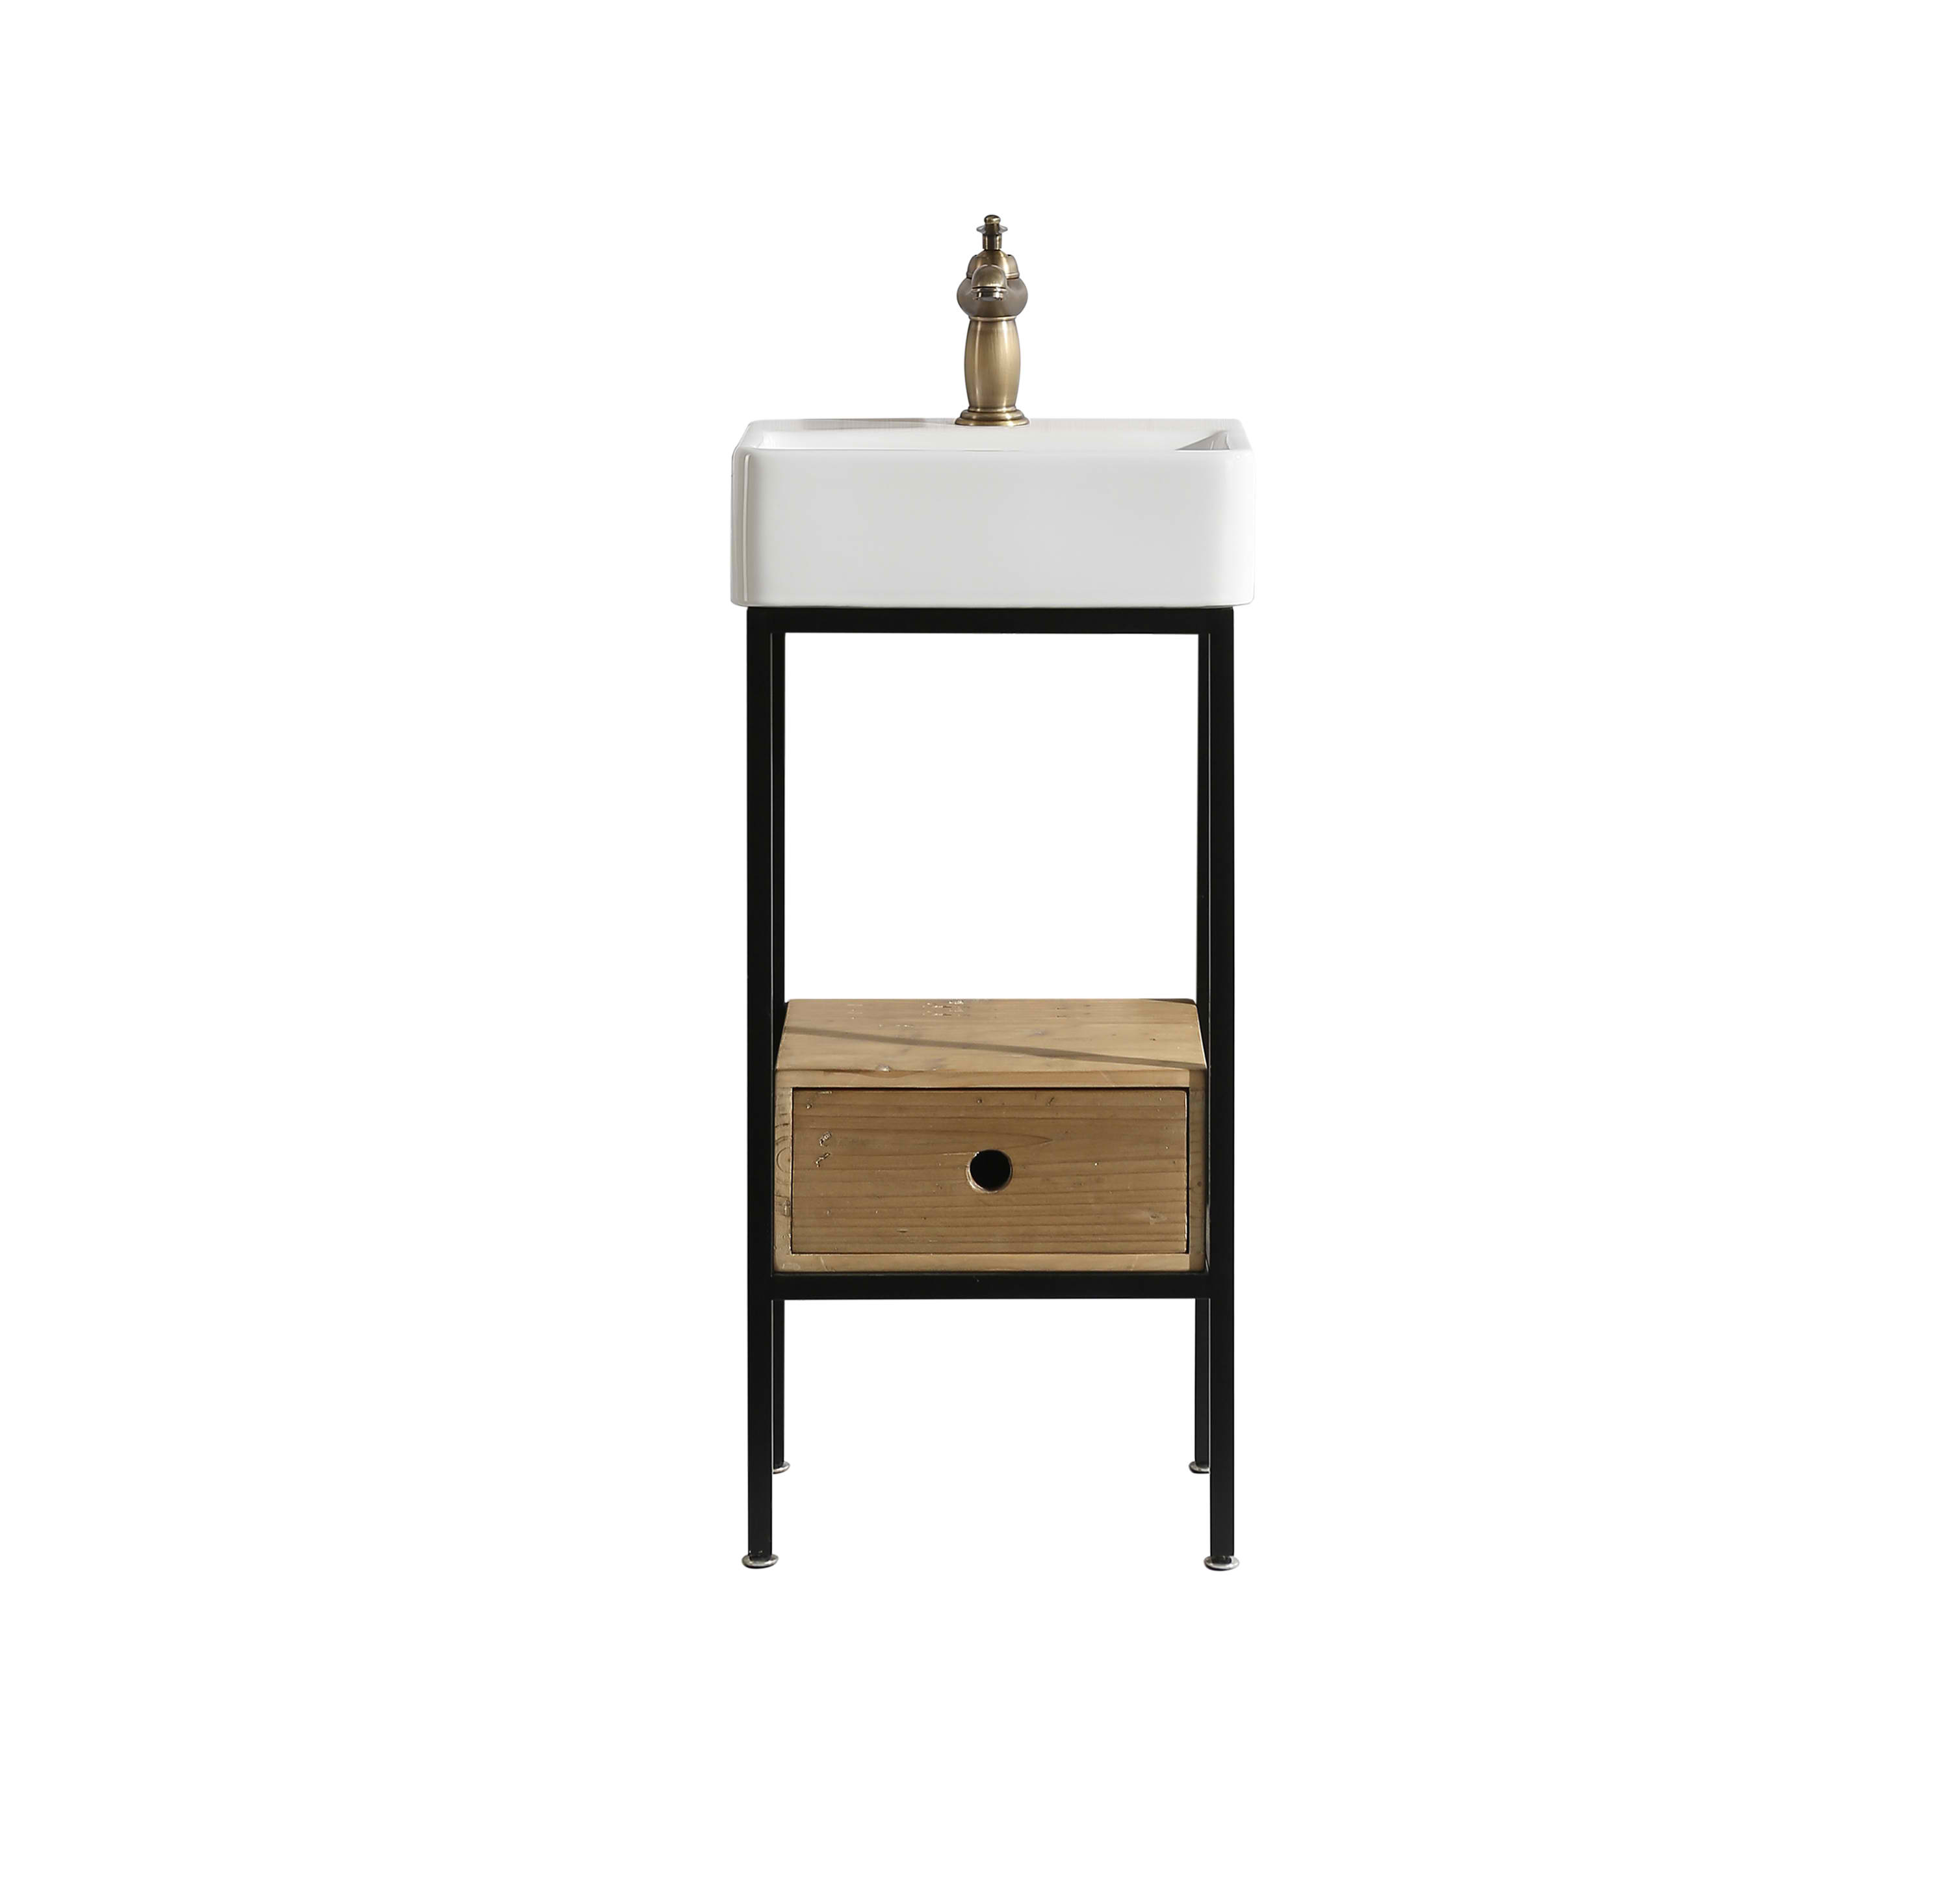 Rustic 16" Single Sink Bathroom Vanity with Porcelain Integrated Counterop in Natural Rustic Wood Finish